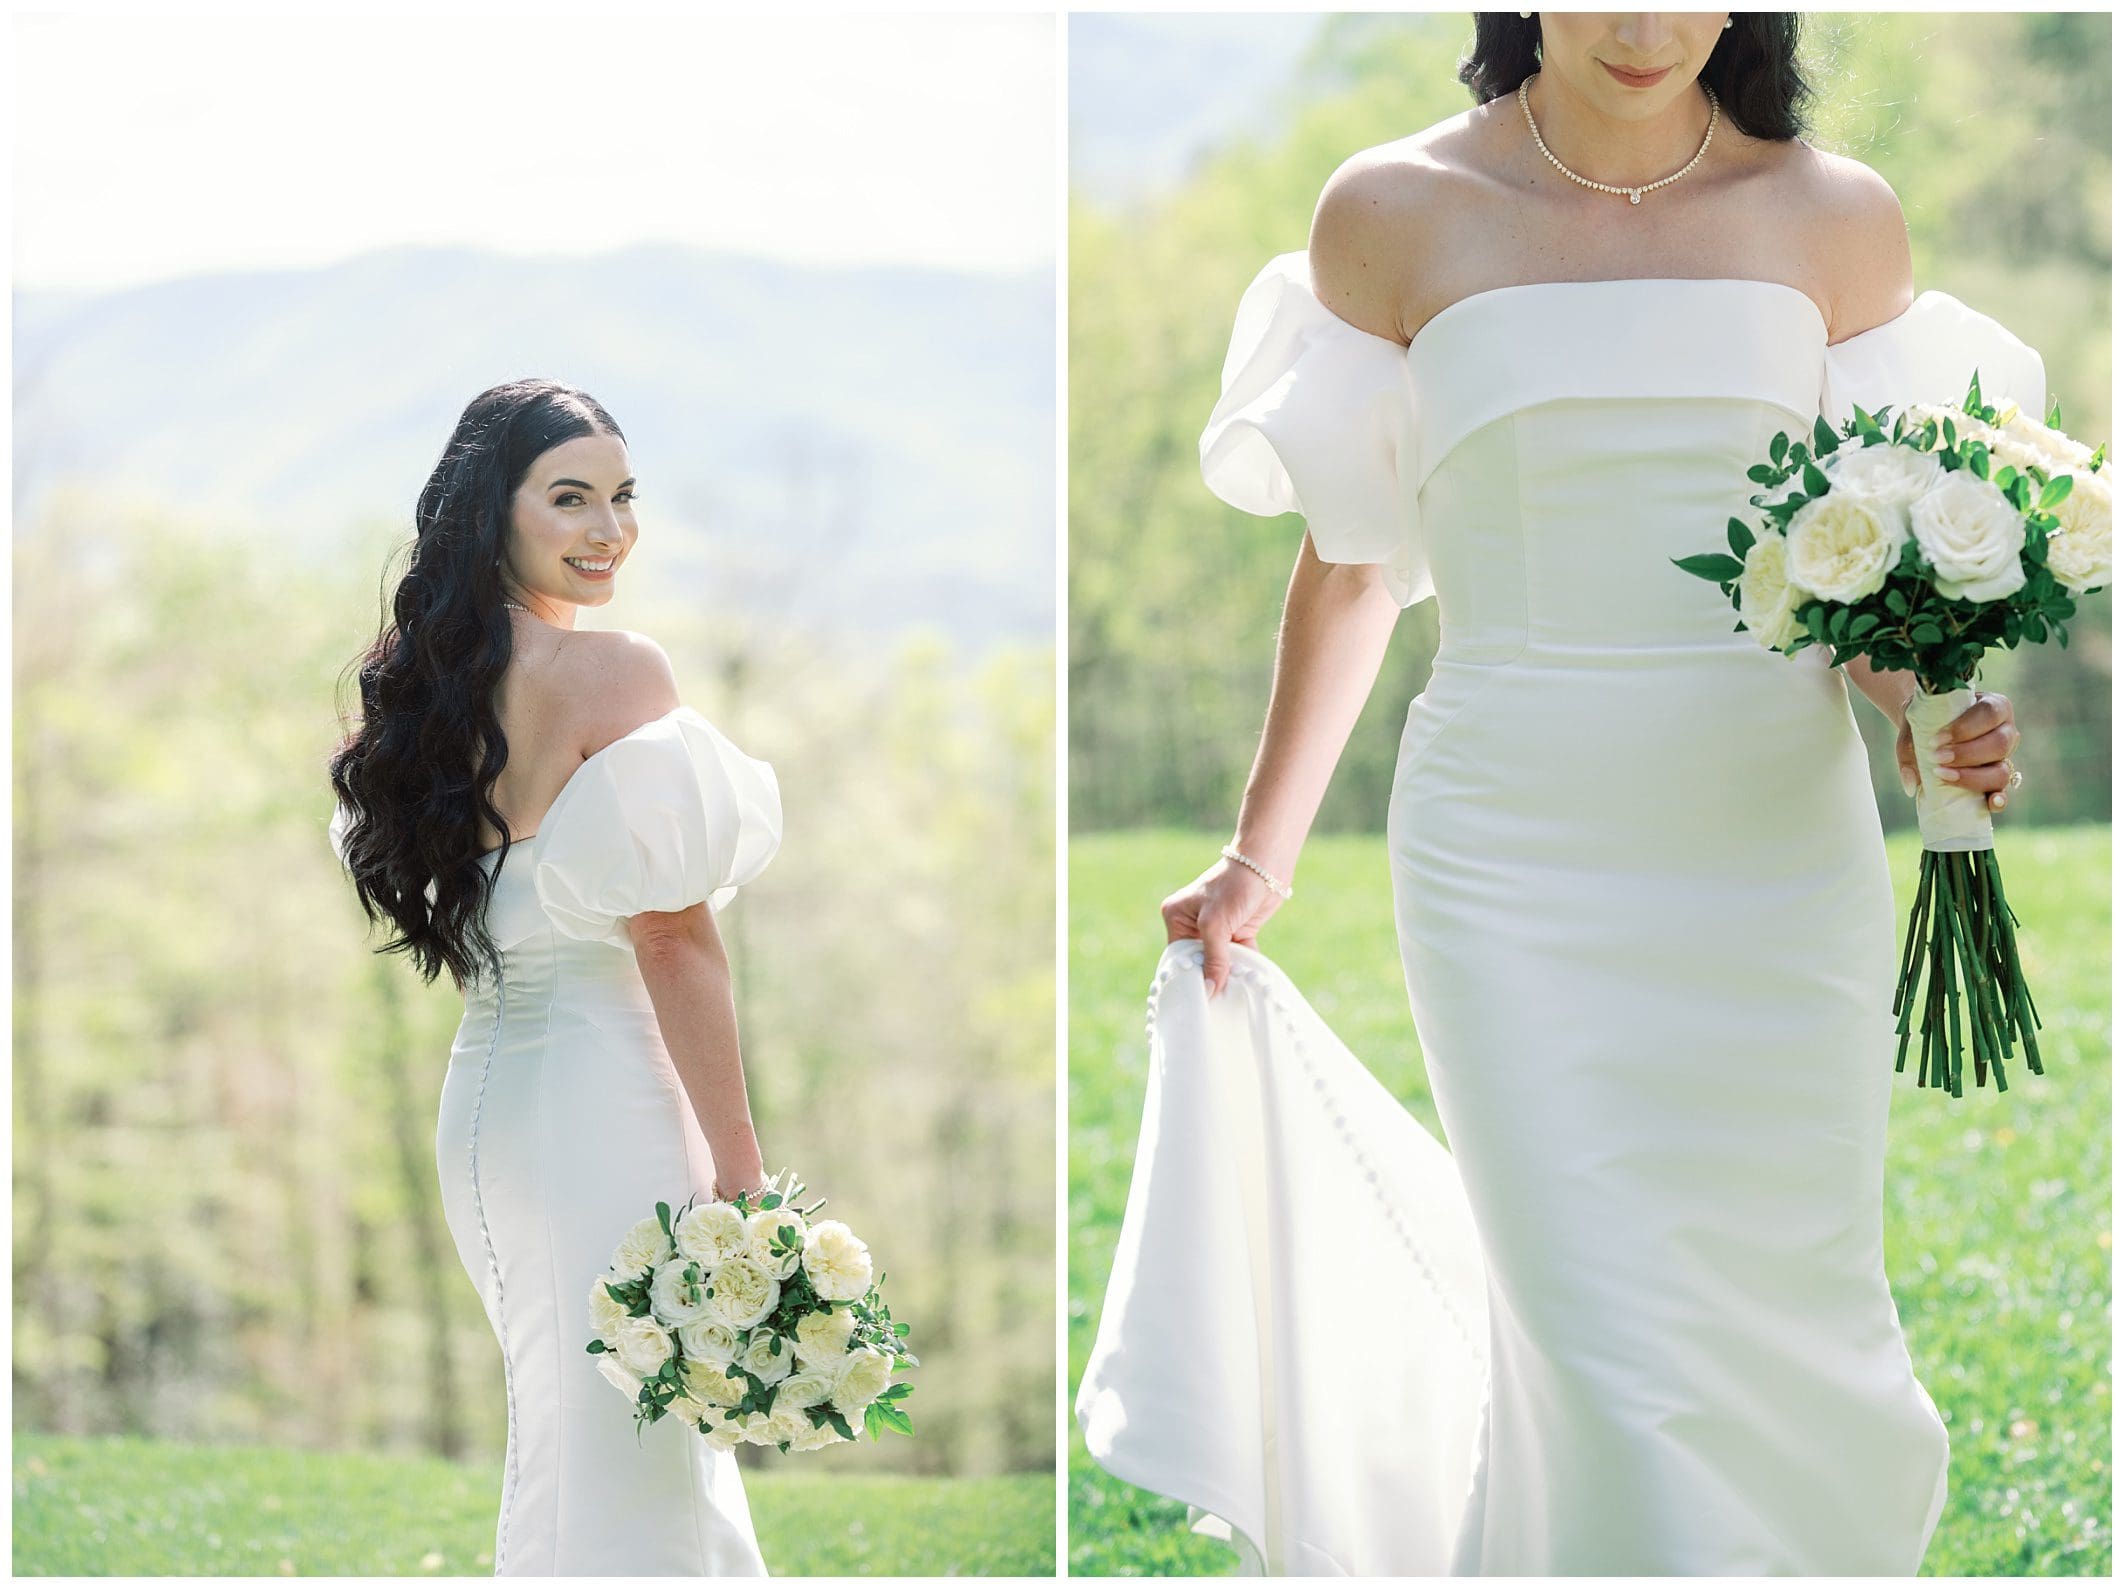 A bride in an elegant white dress with off-shoulder sleeves, holding a bouquet, stands in a lush green field with a mountain backdrop.